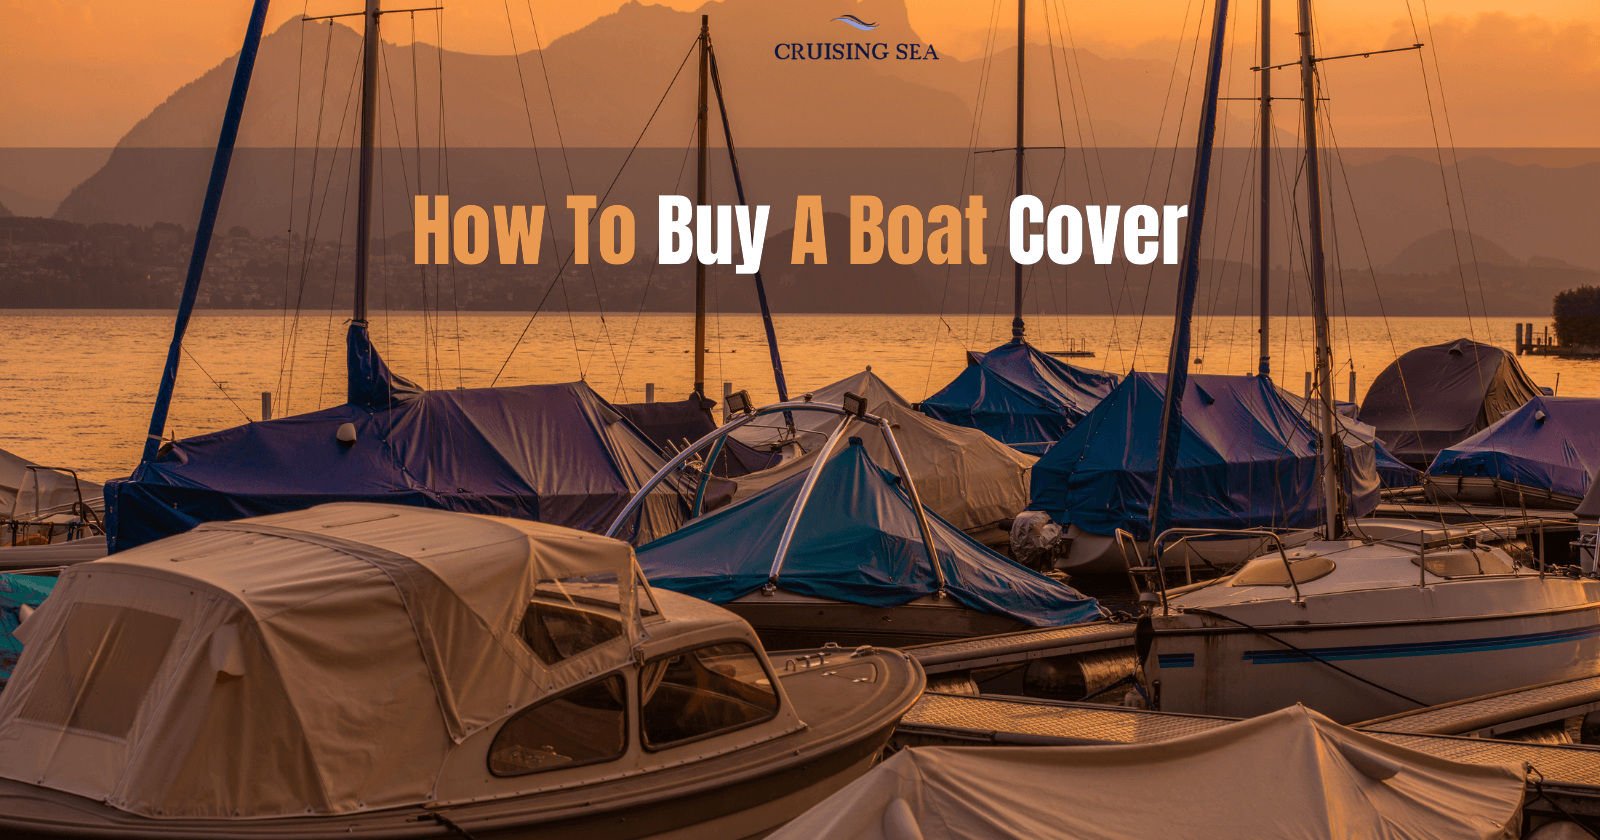 How To Buy A Boat Cover